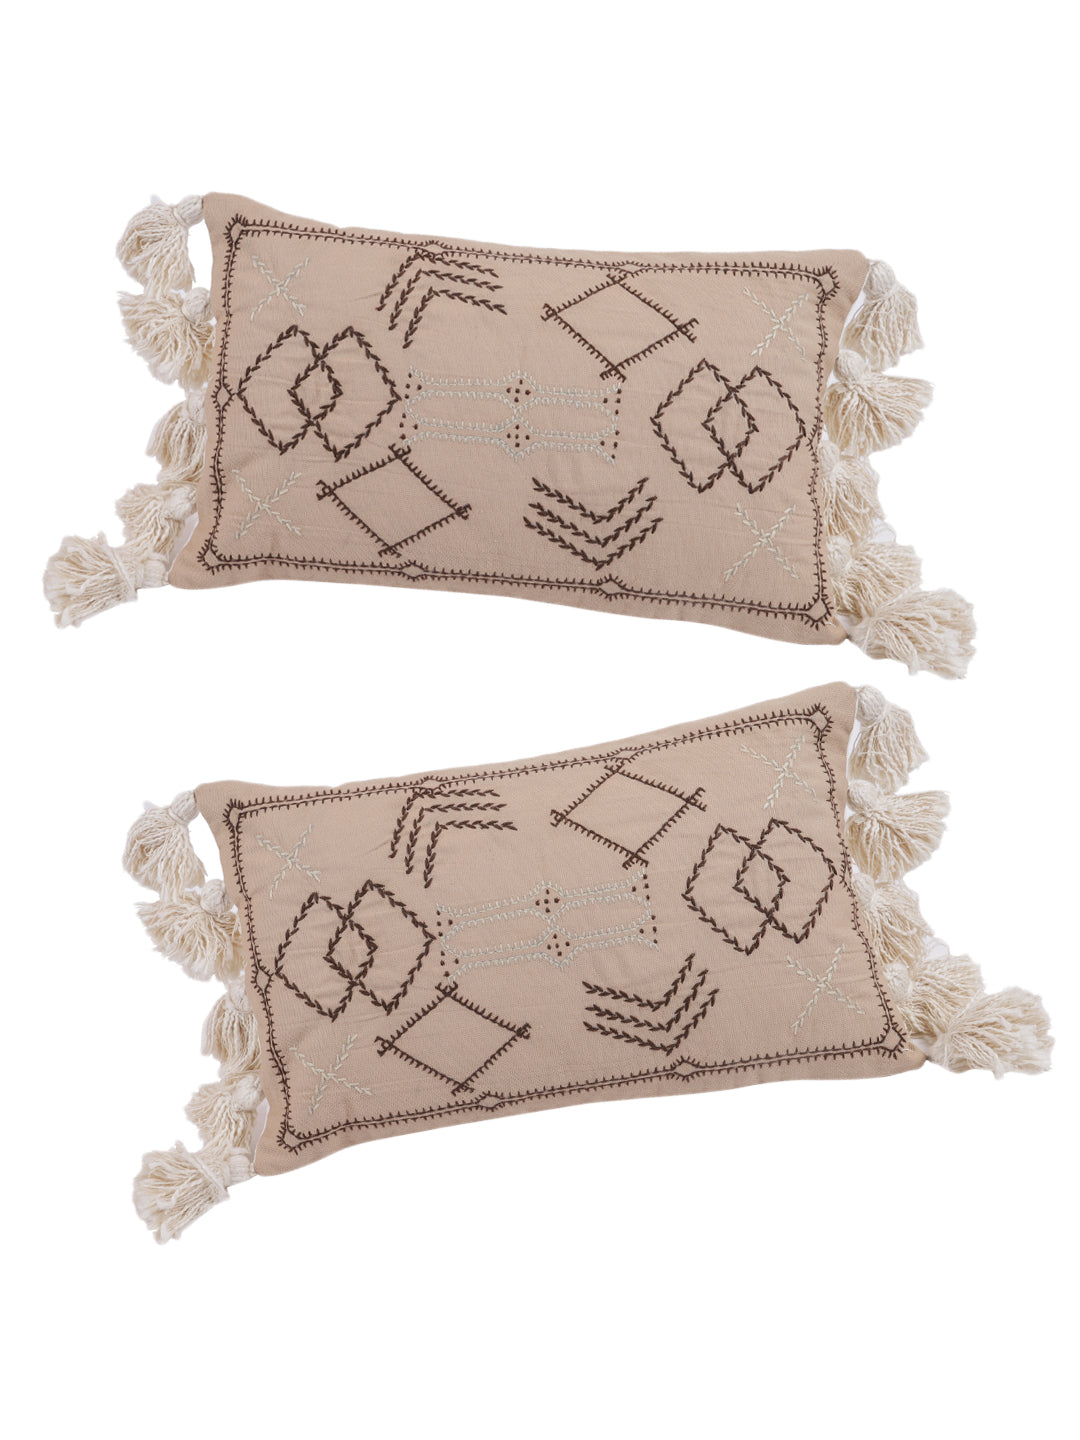 Set of 2 Beige Color African Inspired Cotton Pillow Cover